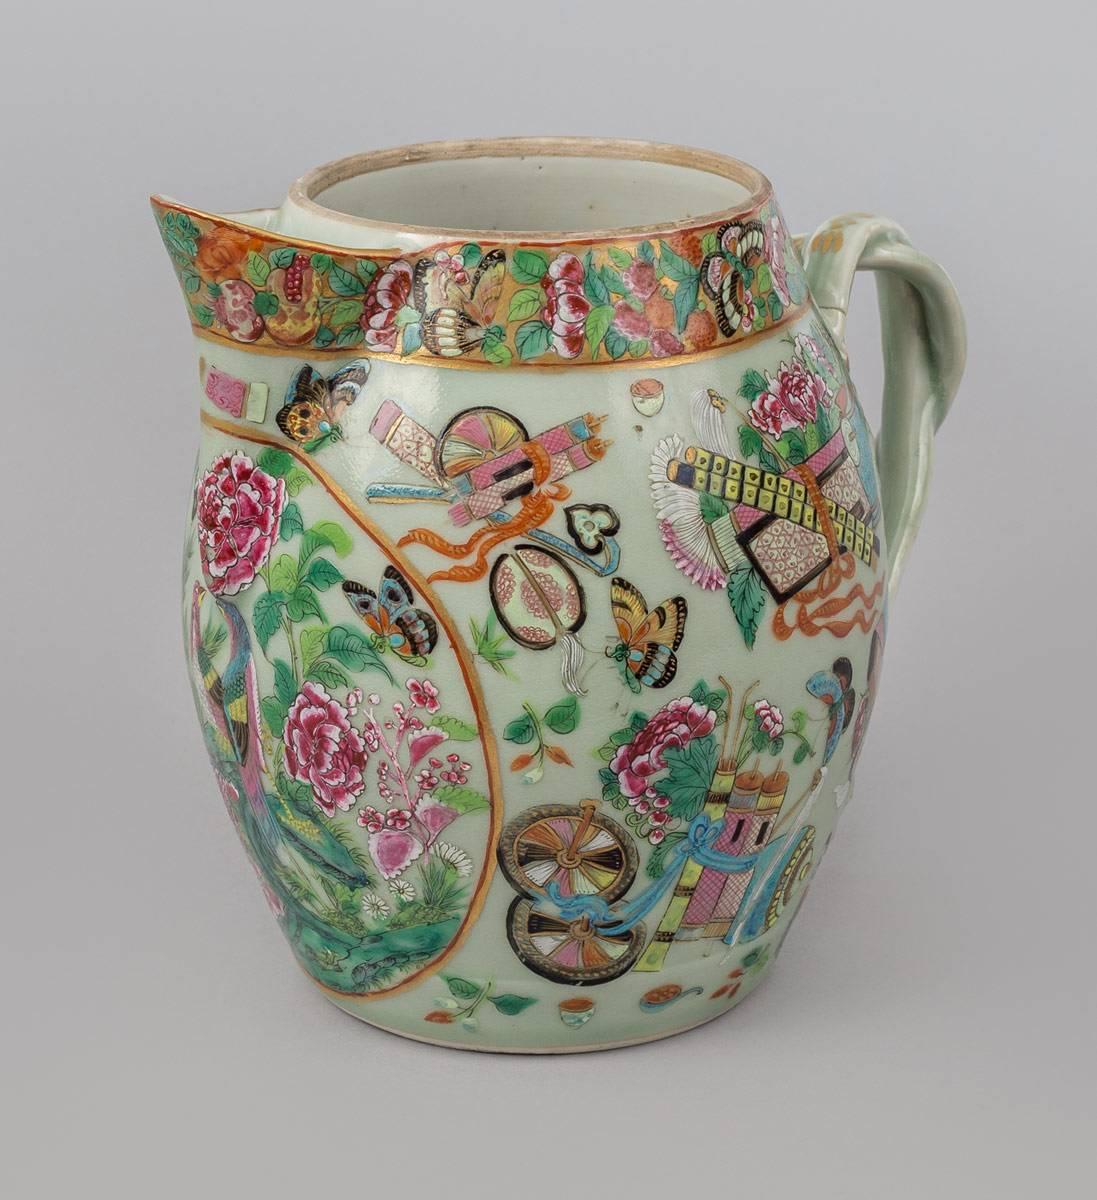 Very unusual large Chinese Export Canton porcelain cider jug in the famille rose palette decorated with exotic birds, butterflies, chrysanthemums, items for celebration, elegant intertwined strapped handles ending in gilded foliate terminals. The